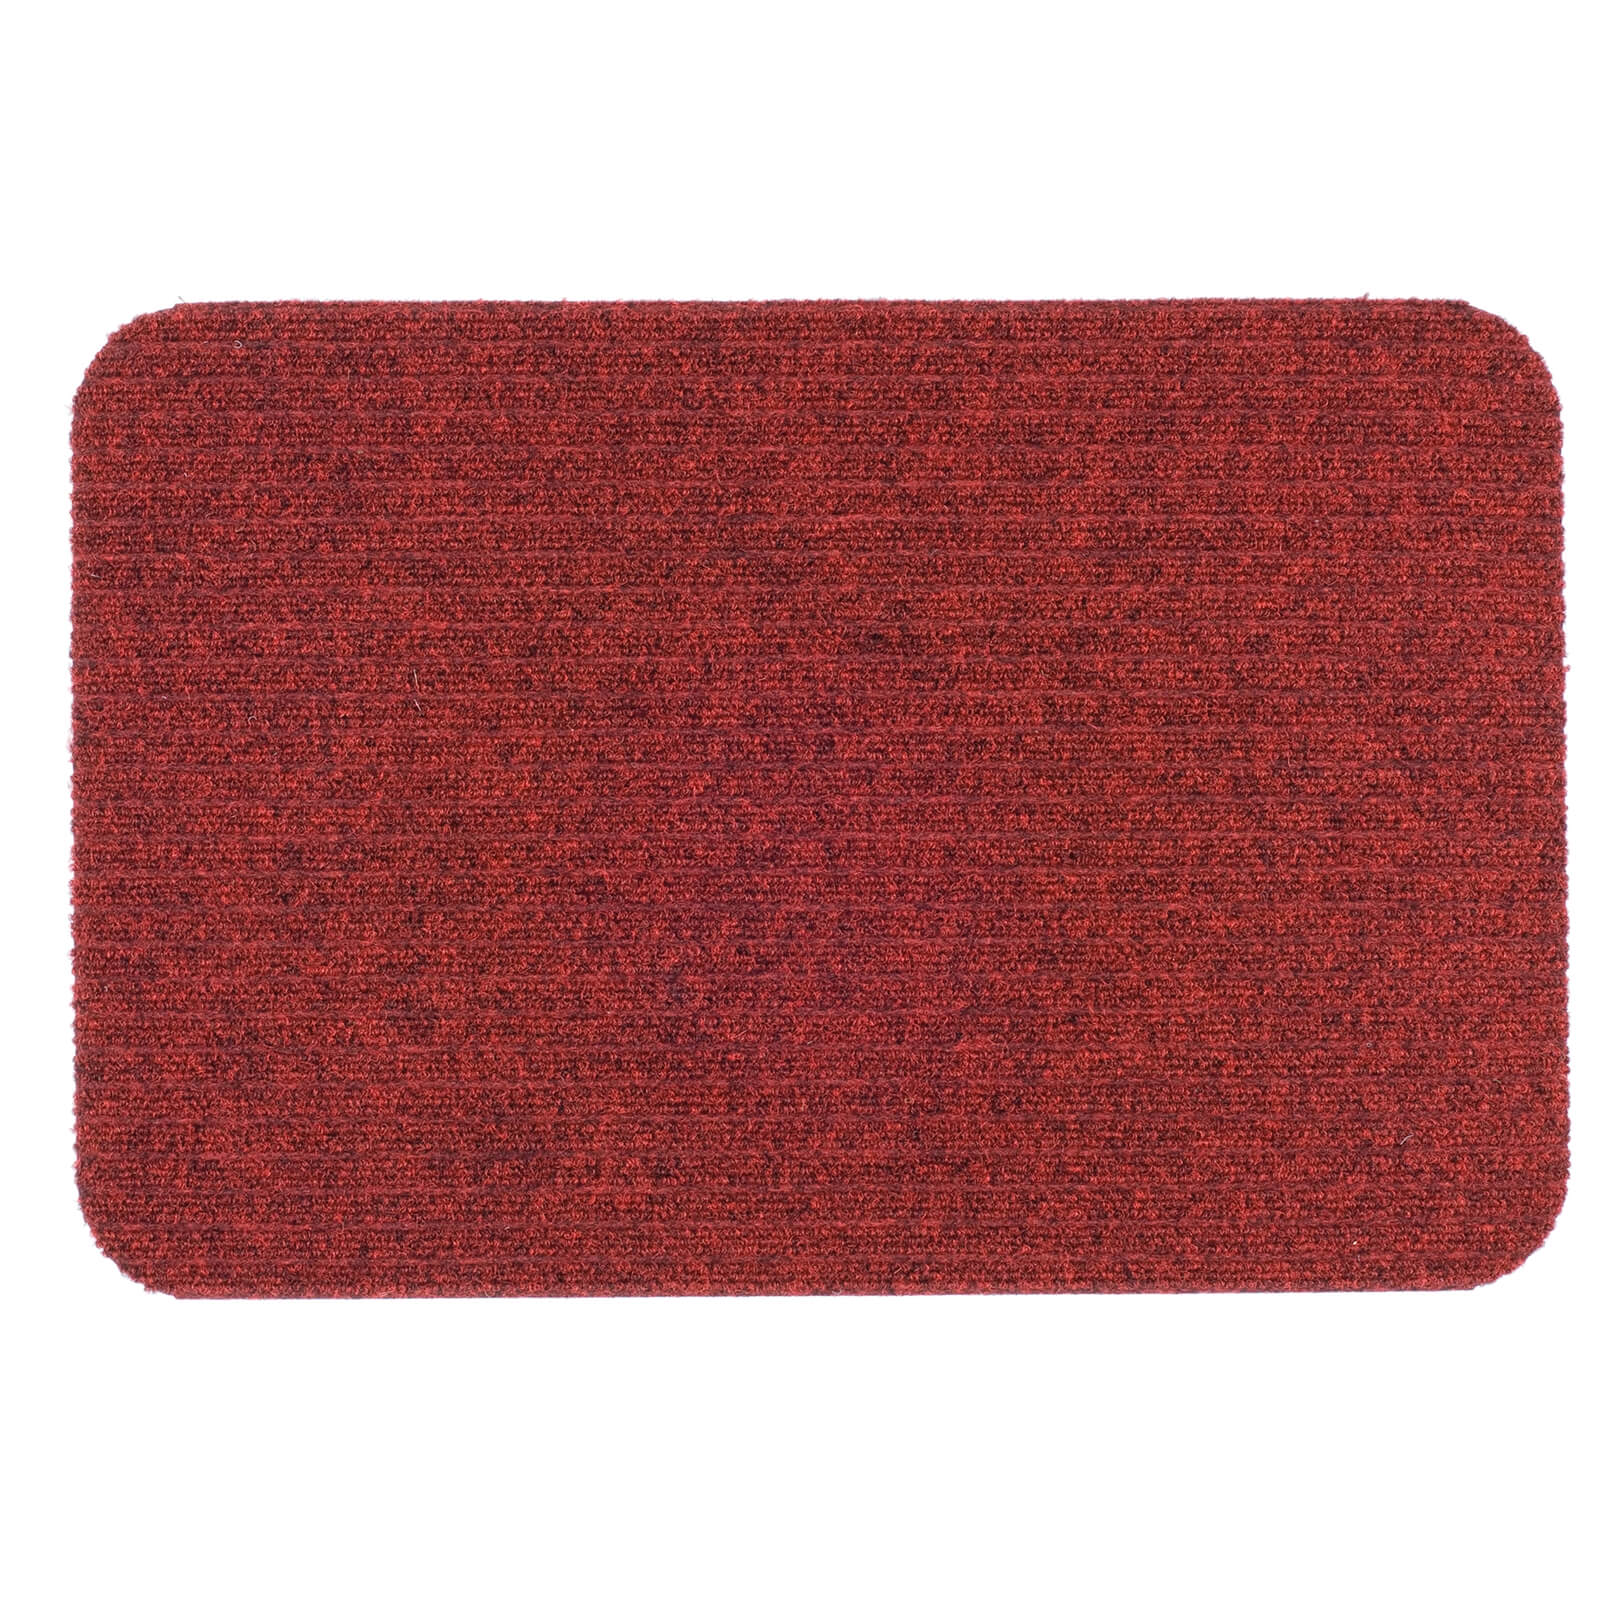 Titan Ribbed Barrier Mat - Red